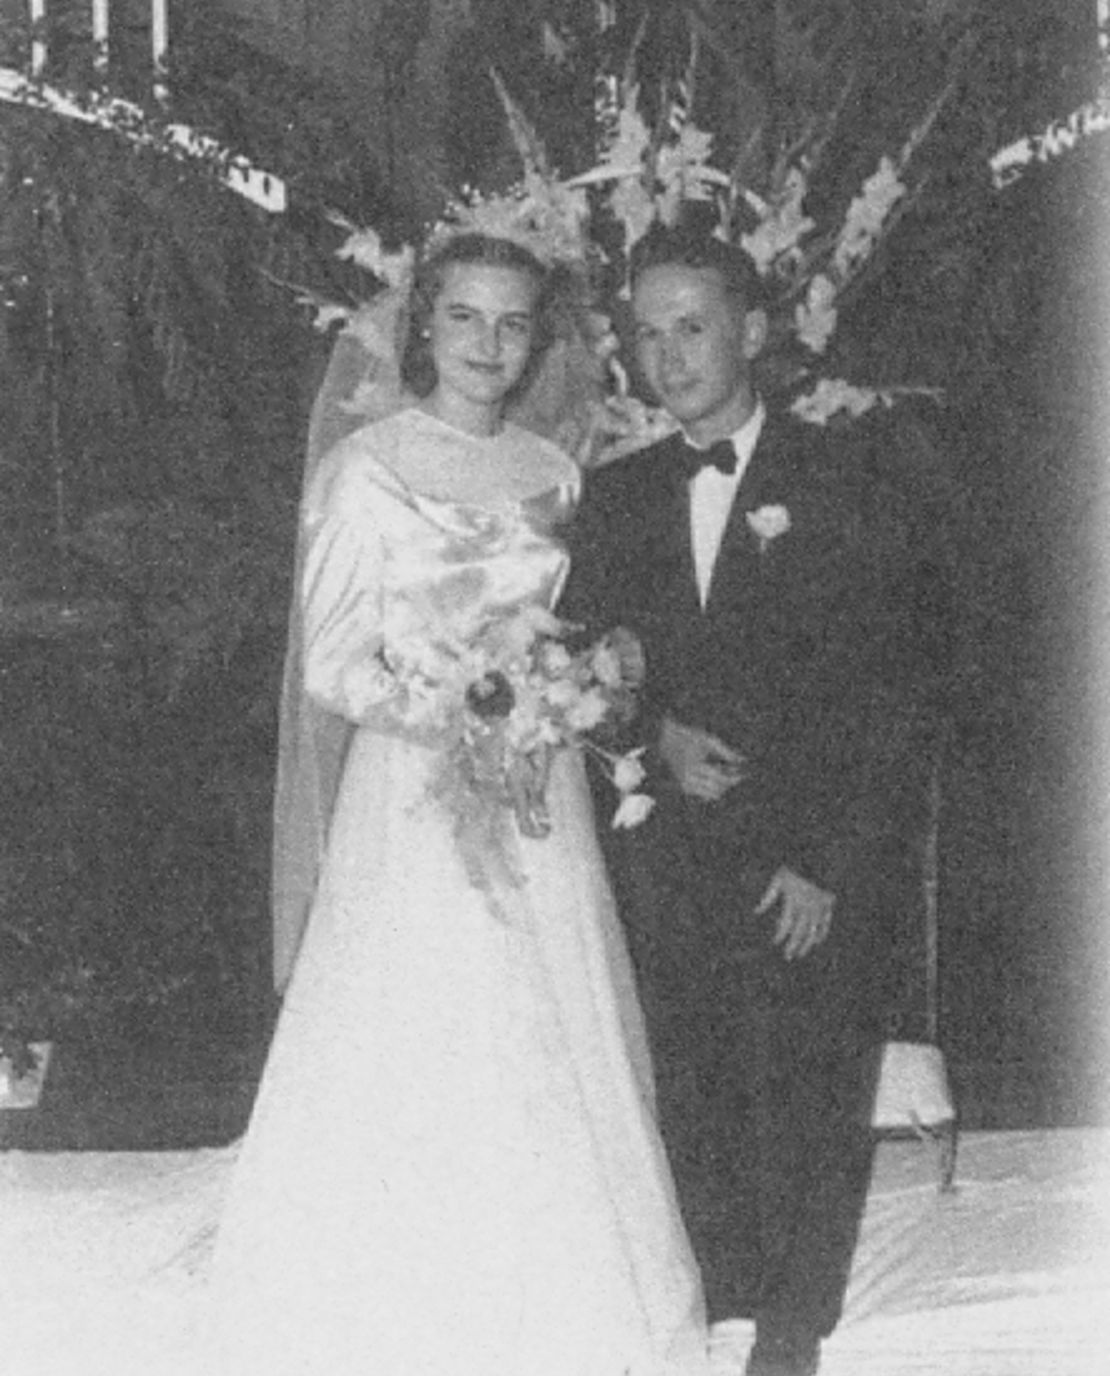 Fred and Nettie Craddock were high school sweethearts and are still together more than 50 years later.